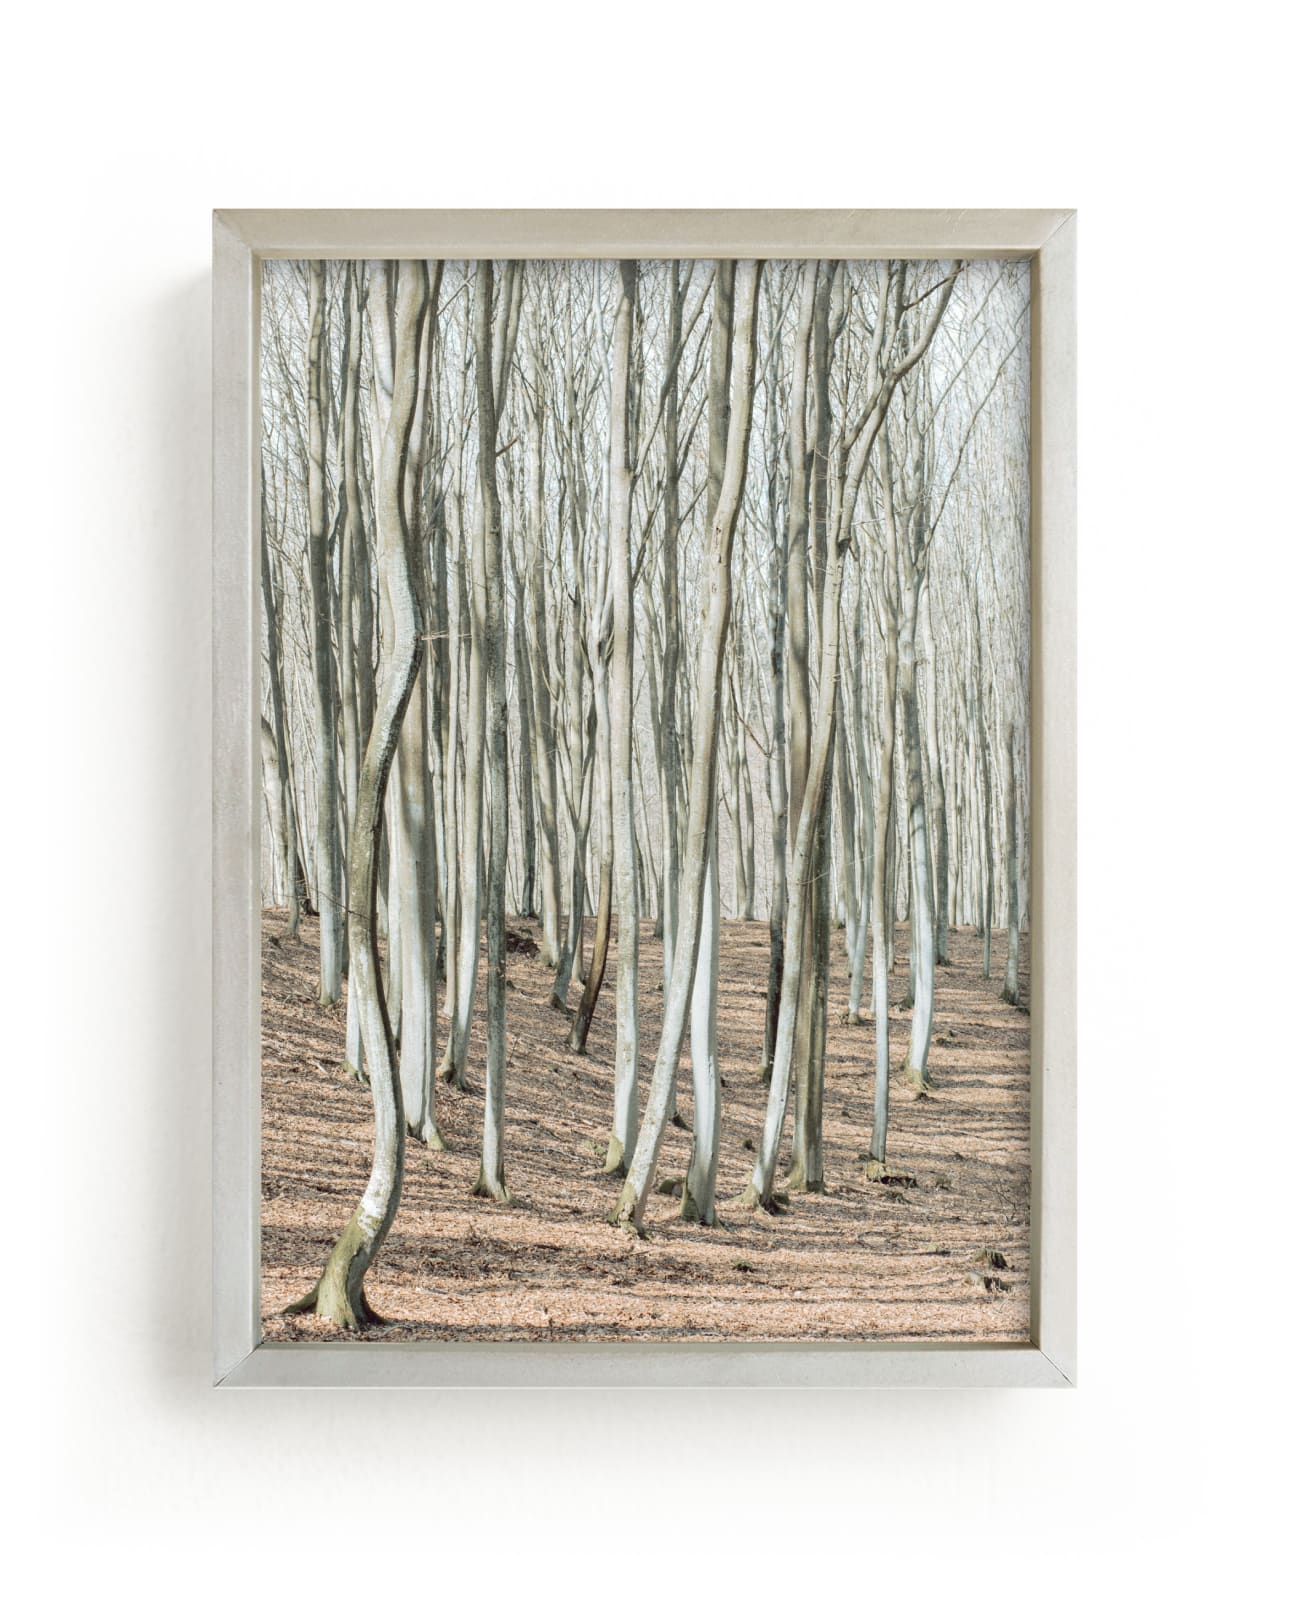 "Smooth forest" by Lying on the grass in beautiful frame options and a variety of sizes.